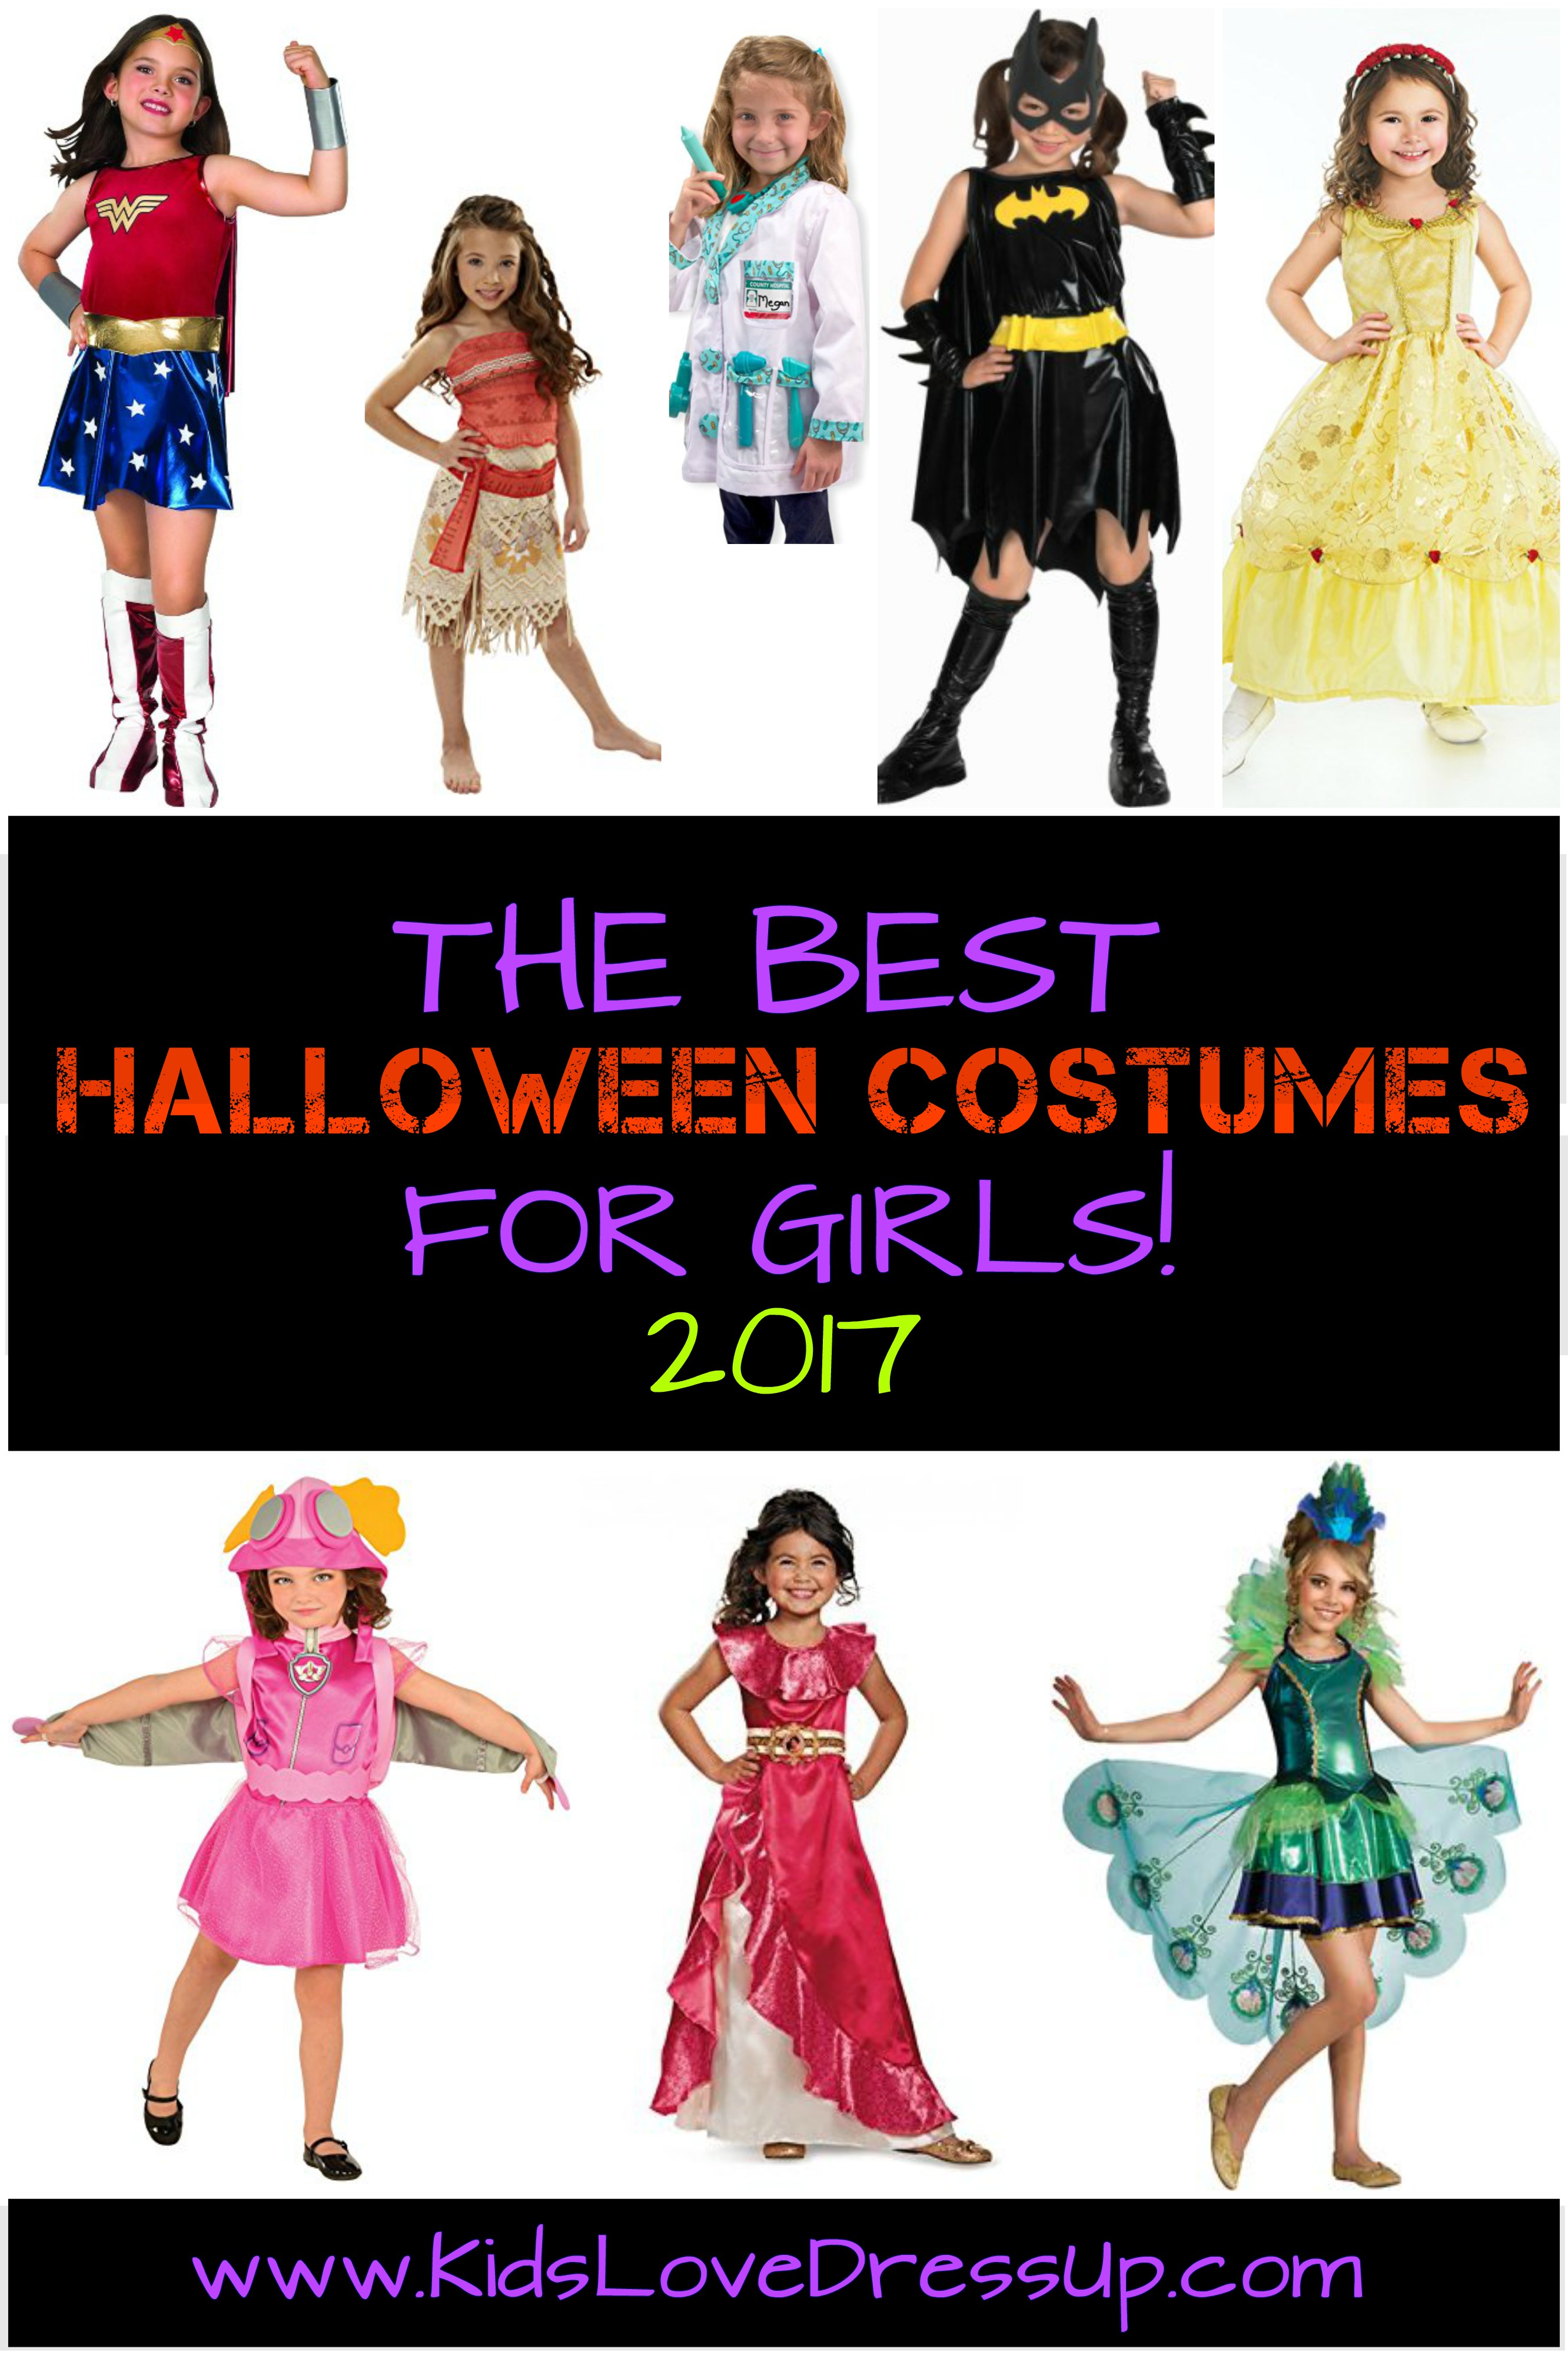 The Best Halloween Costumes for Girls for 2017 - see 10 of the most popular girls costumes for Halloween this year! Kids dress up, costumes kids, girls dress up costumes, Halloween costumes